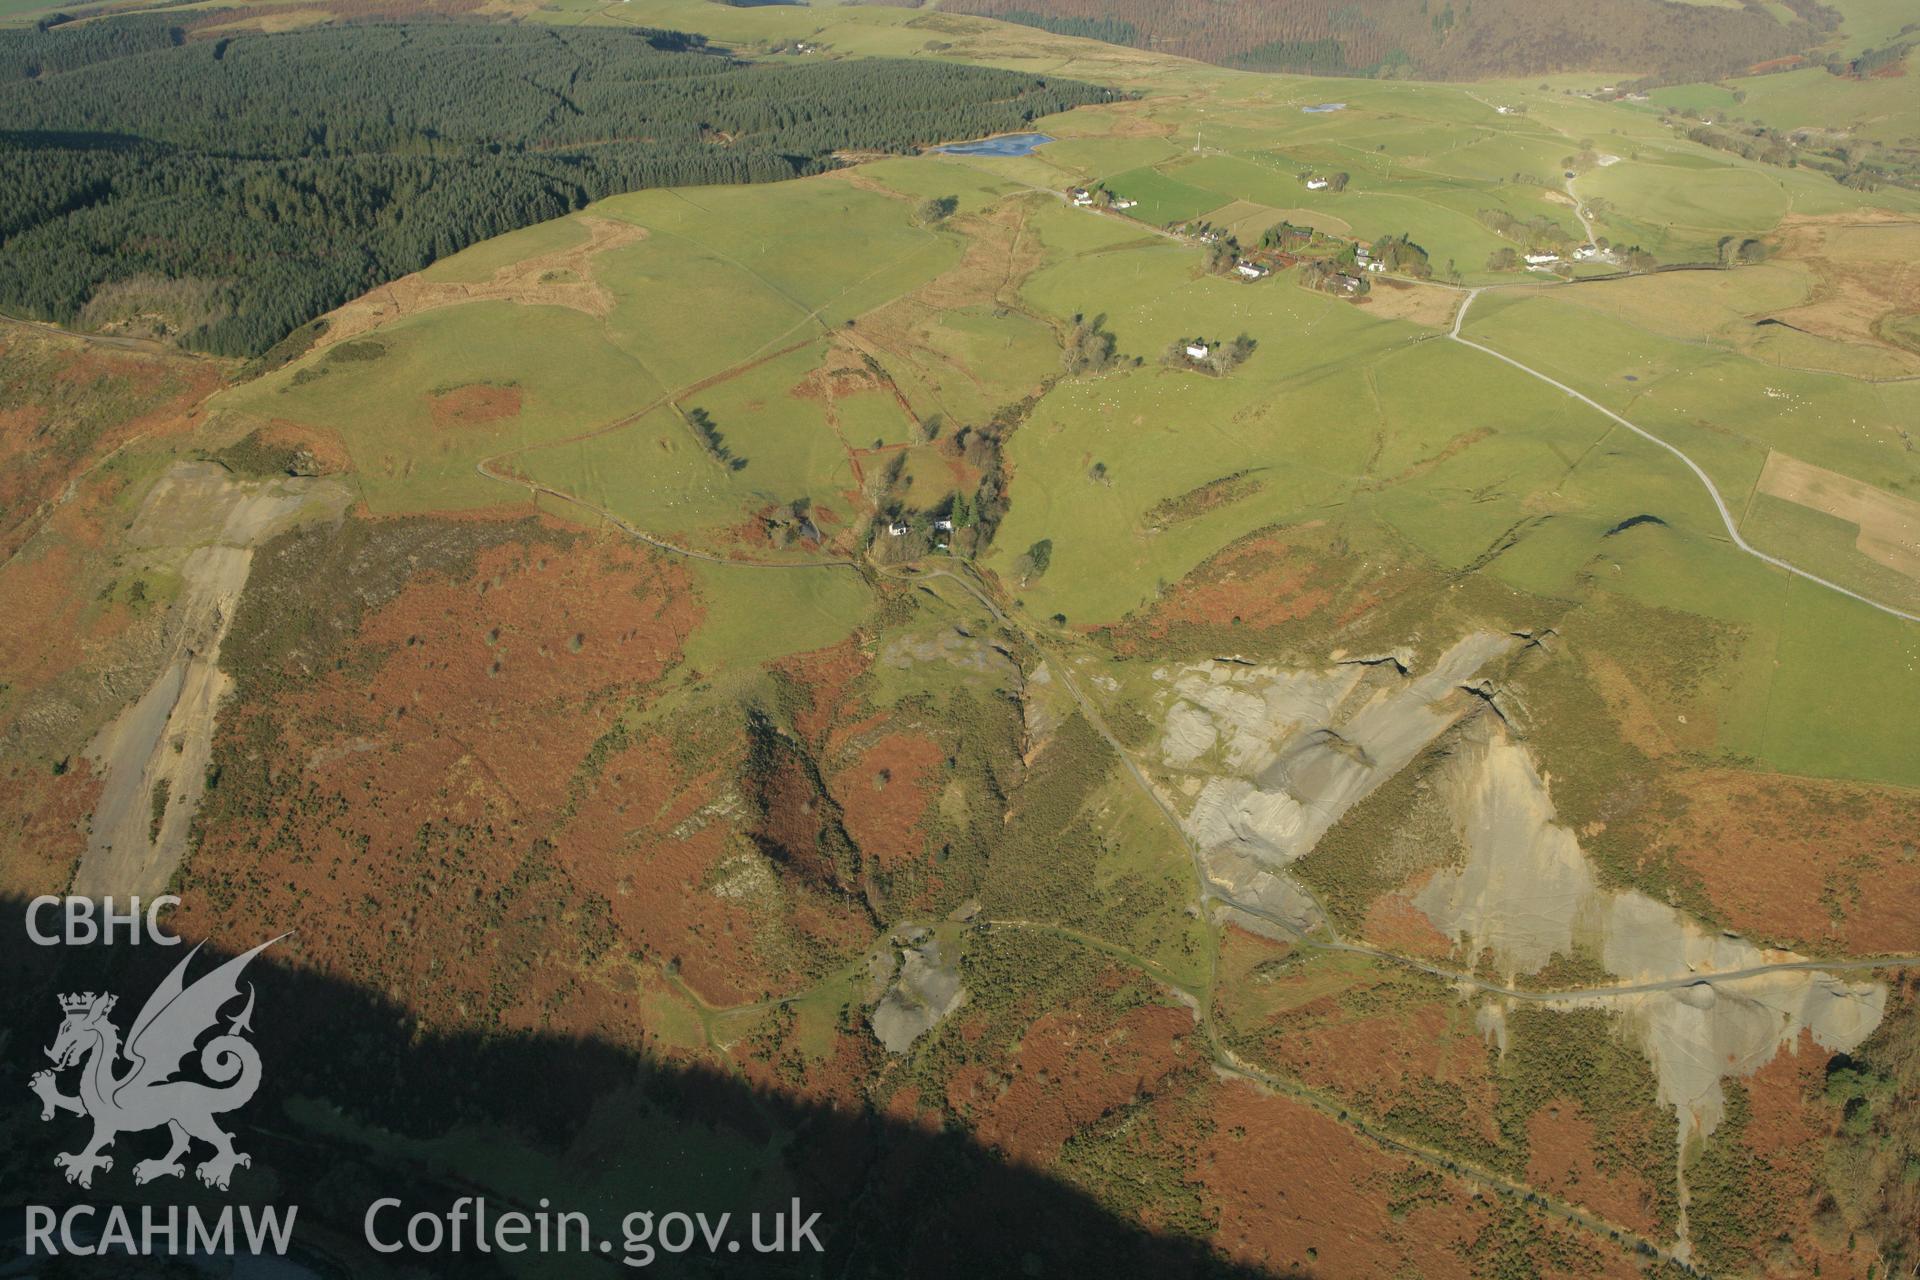 RCAHMW colour oblique photograph of Grogwynion lead mines. Taken by Toby Driver on 20/12/2007.